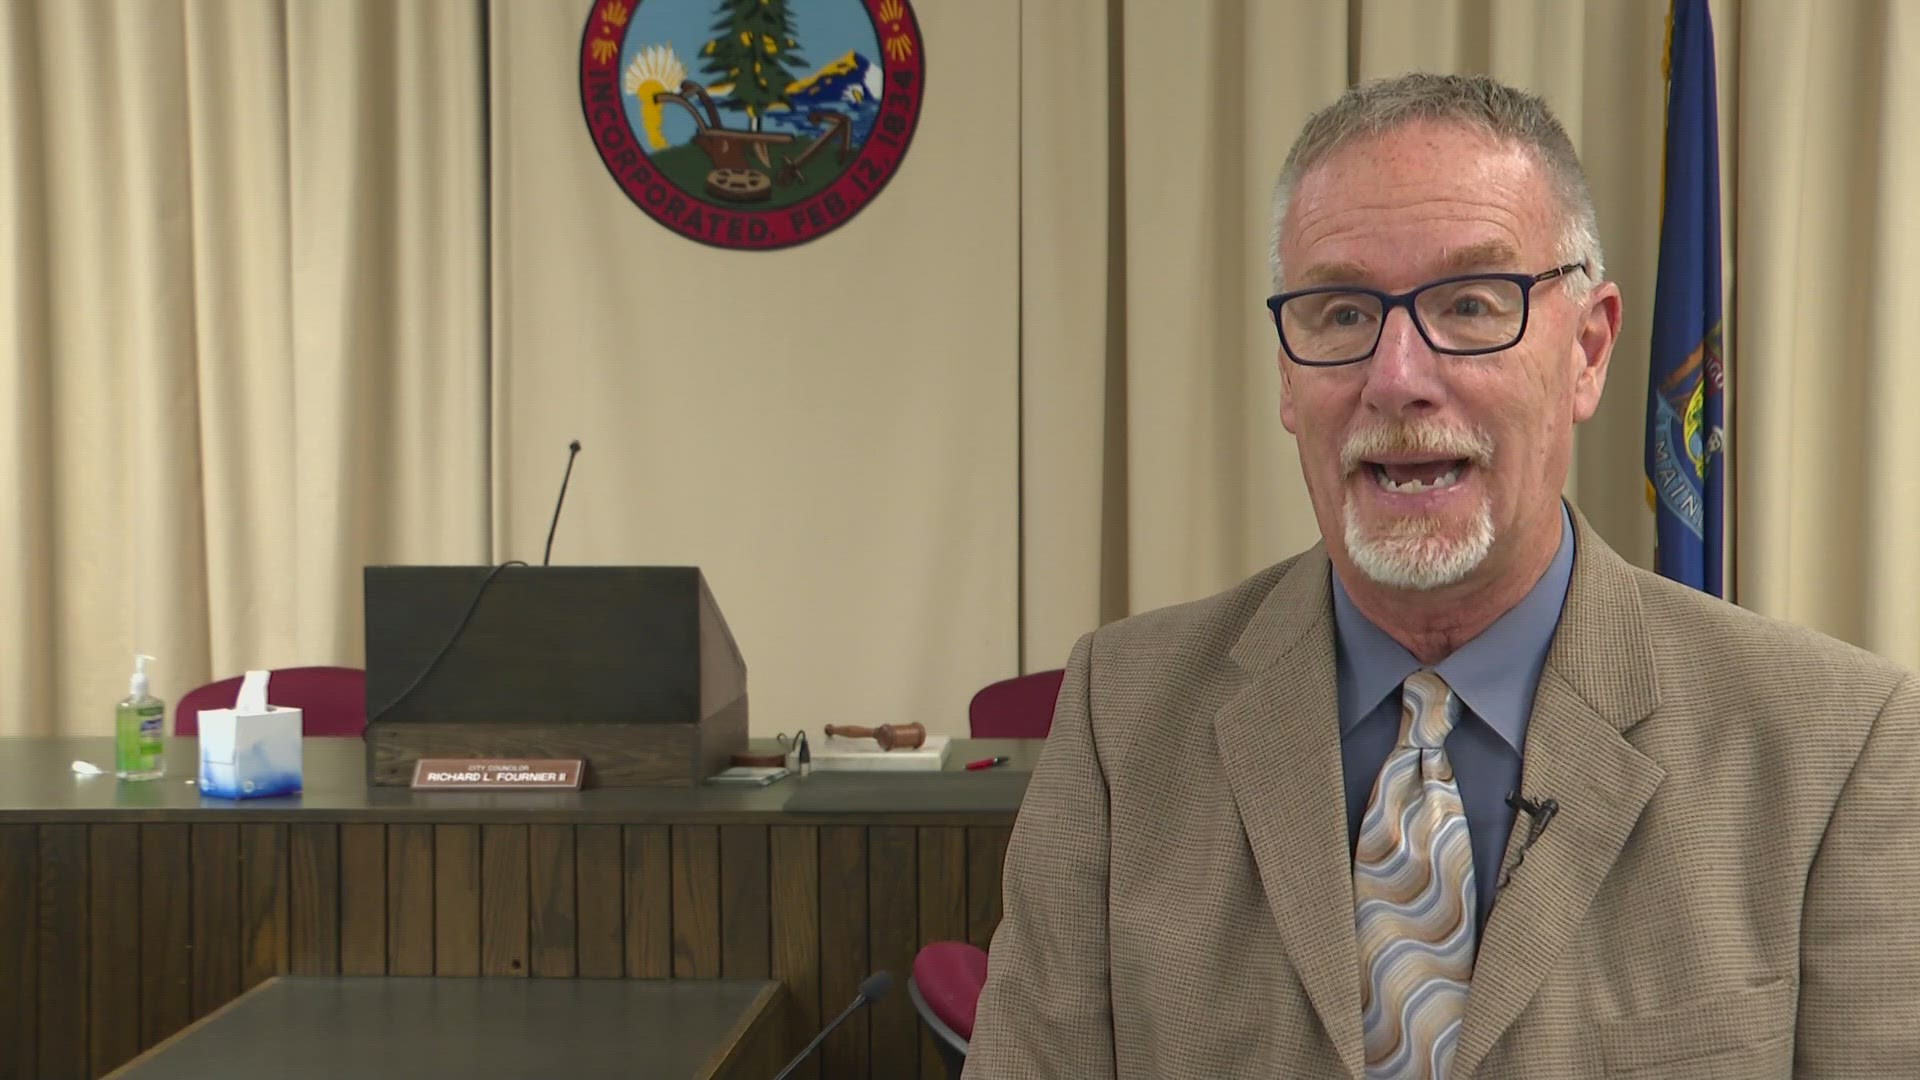 James Tager will have served three years as Bangor superintendent when he finishes the job.